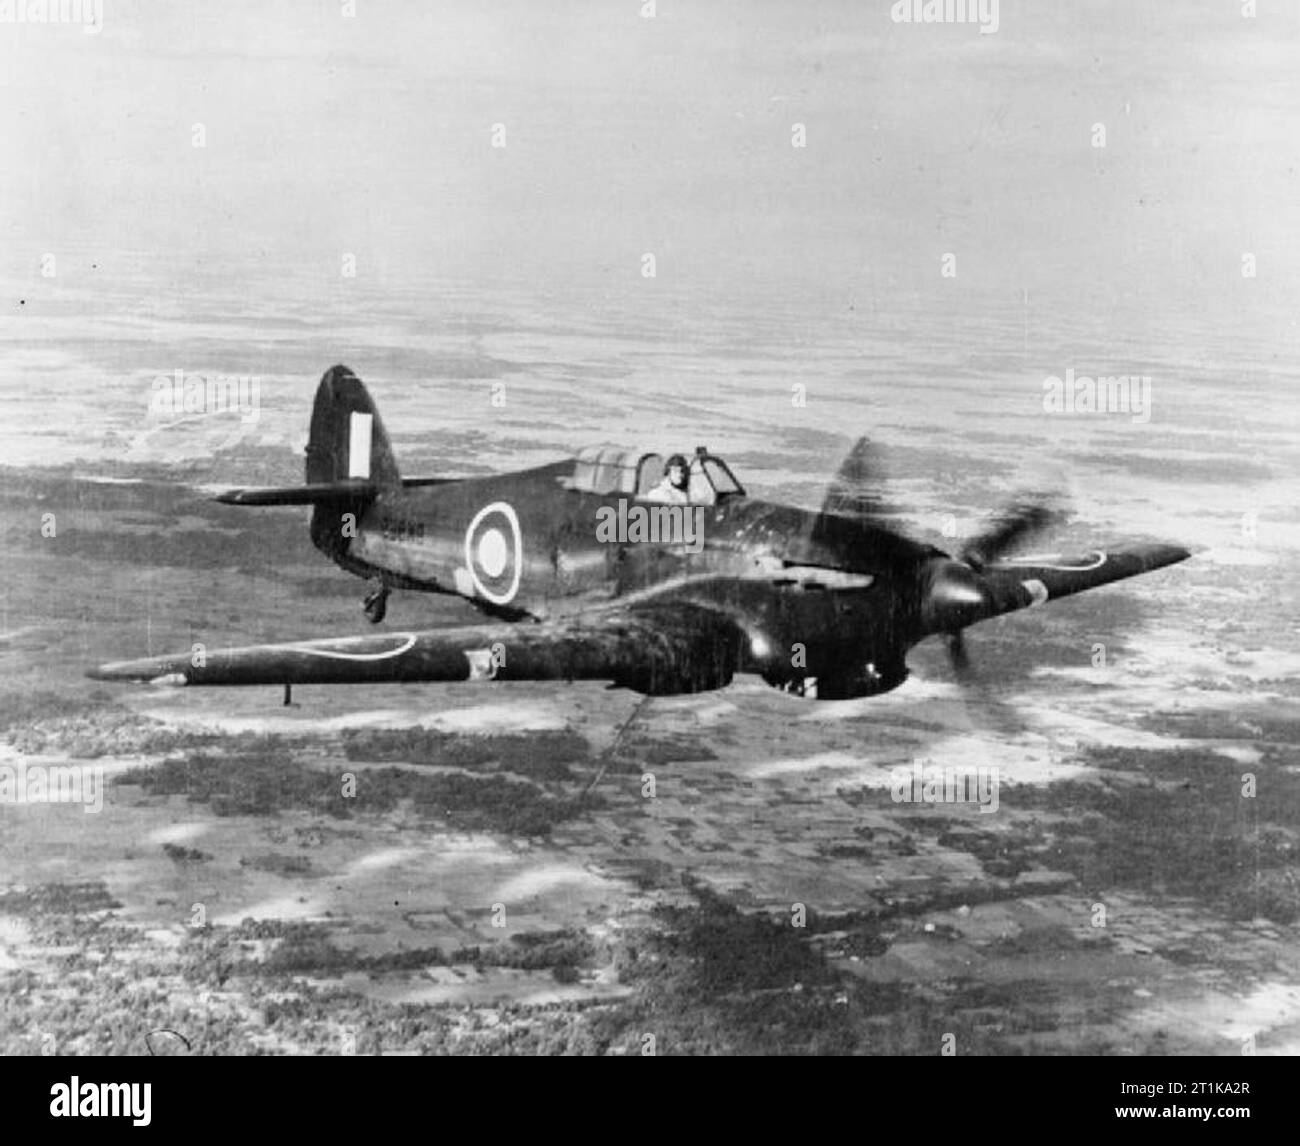 Royal Air Force Operations in the Far East, 1941-1945. Hawker Hurricane PR Mark IIB, BM969, of ?S? Flight No. 3 Photographic Reconnaissance Unit, based at Dum Dum, India, in flight over West Bengal. #### Reversed image #### Stock Photo